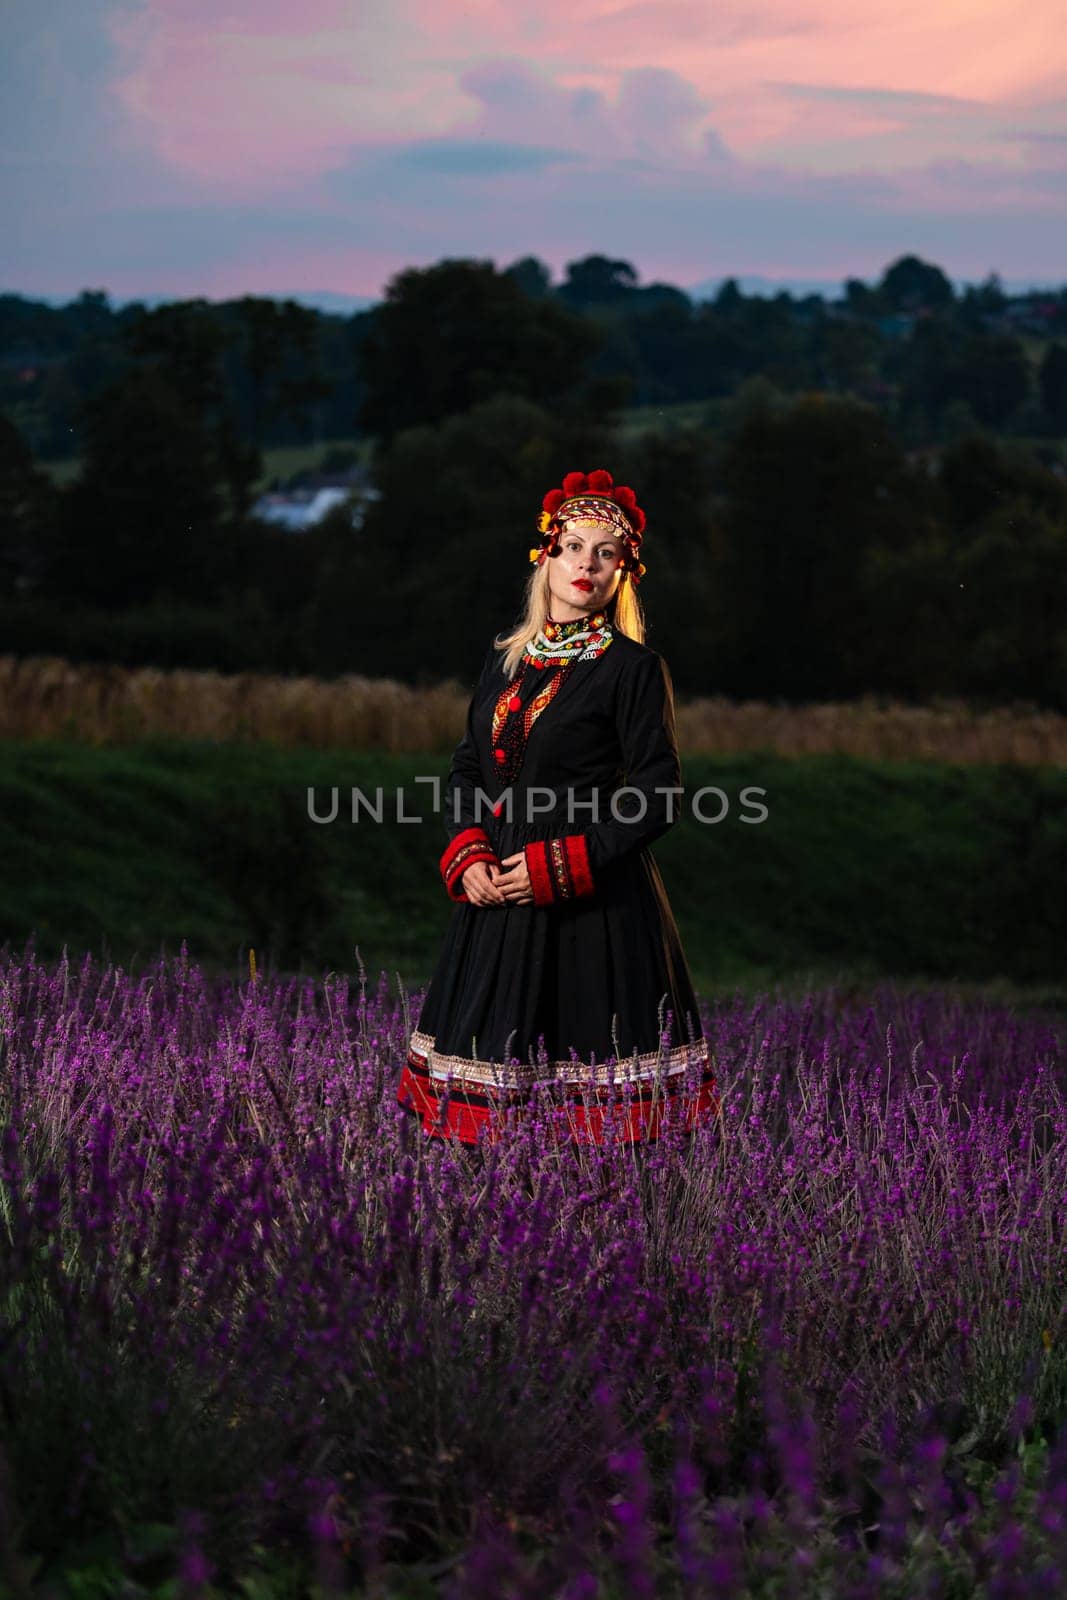 The girl is wearing a chelsea headdress and a black dress decorated with red embroidery by Niko_Cingaryuk